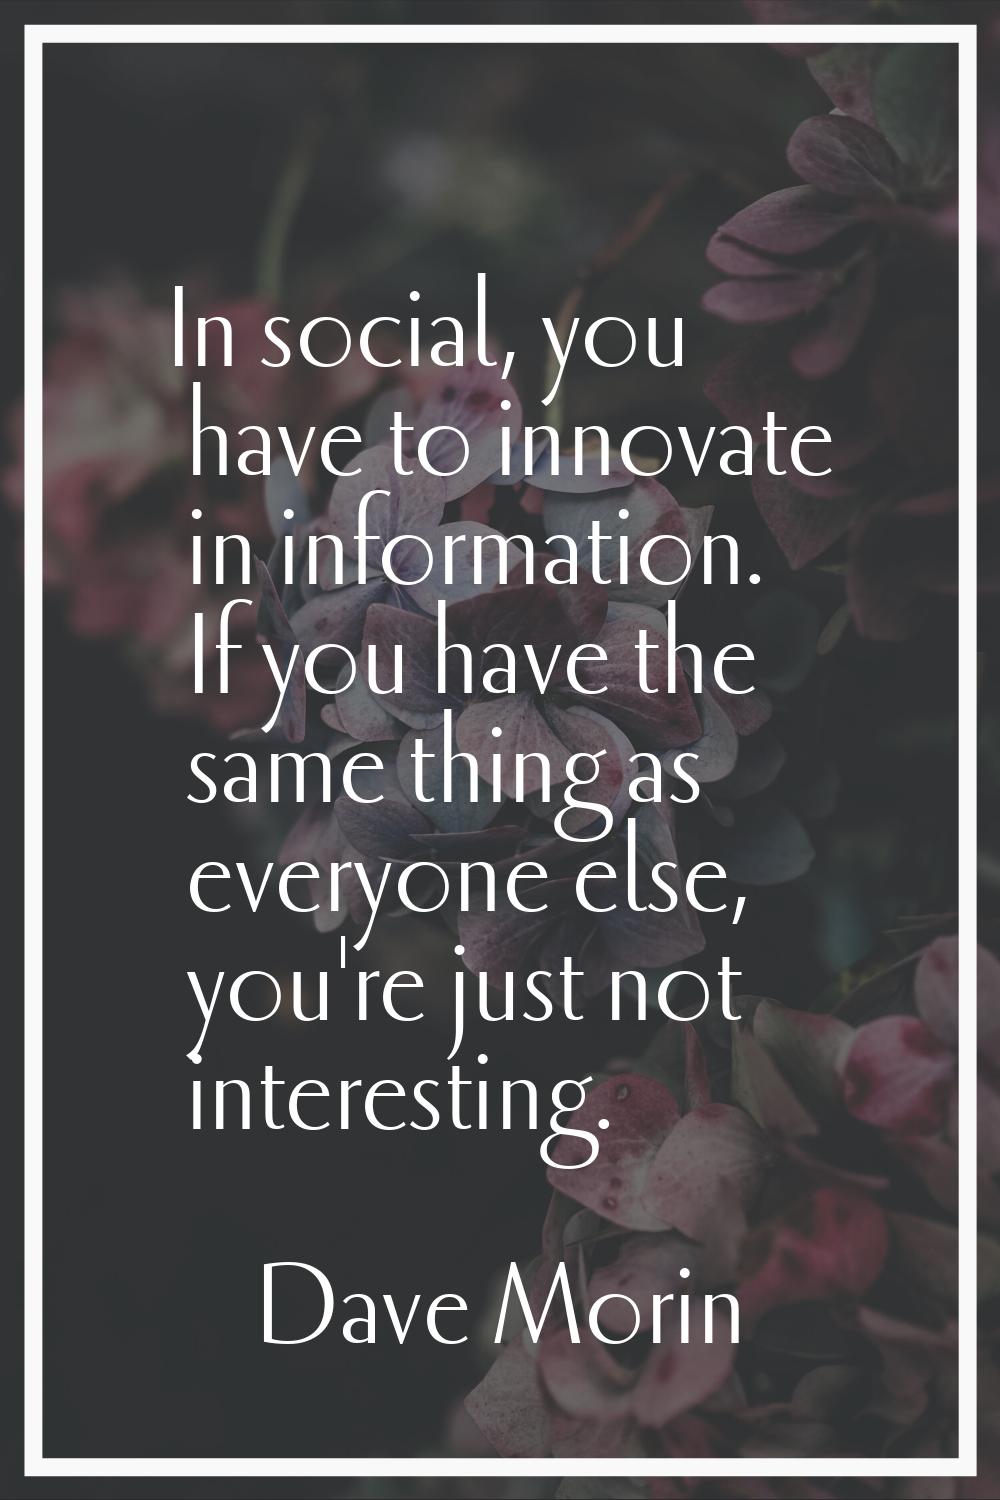 In social, you have to innovate in information. If you have the same thing as everyone else, you're